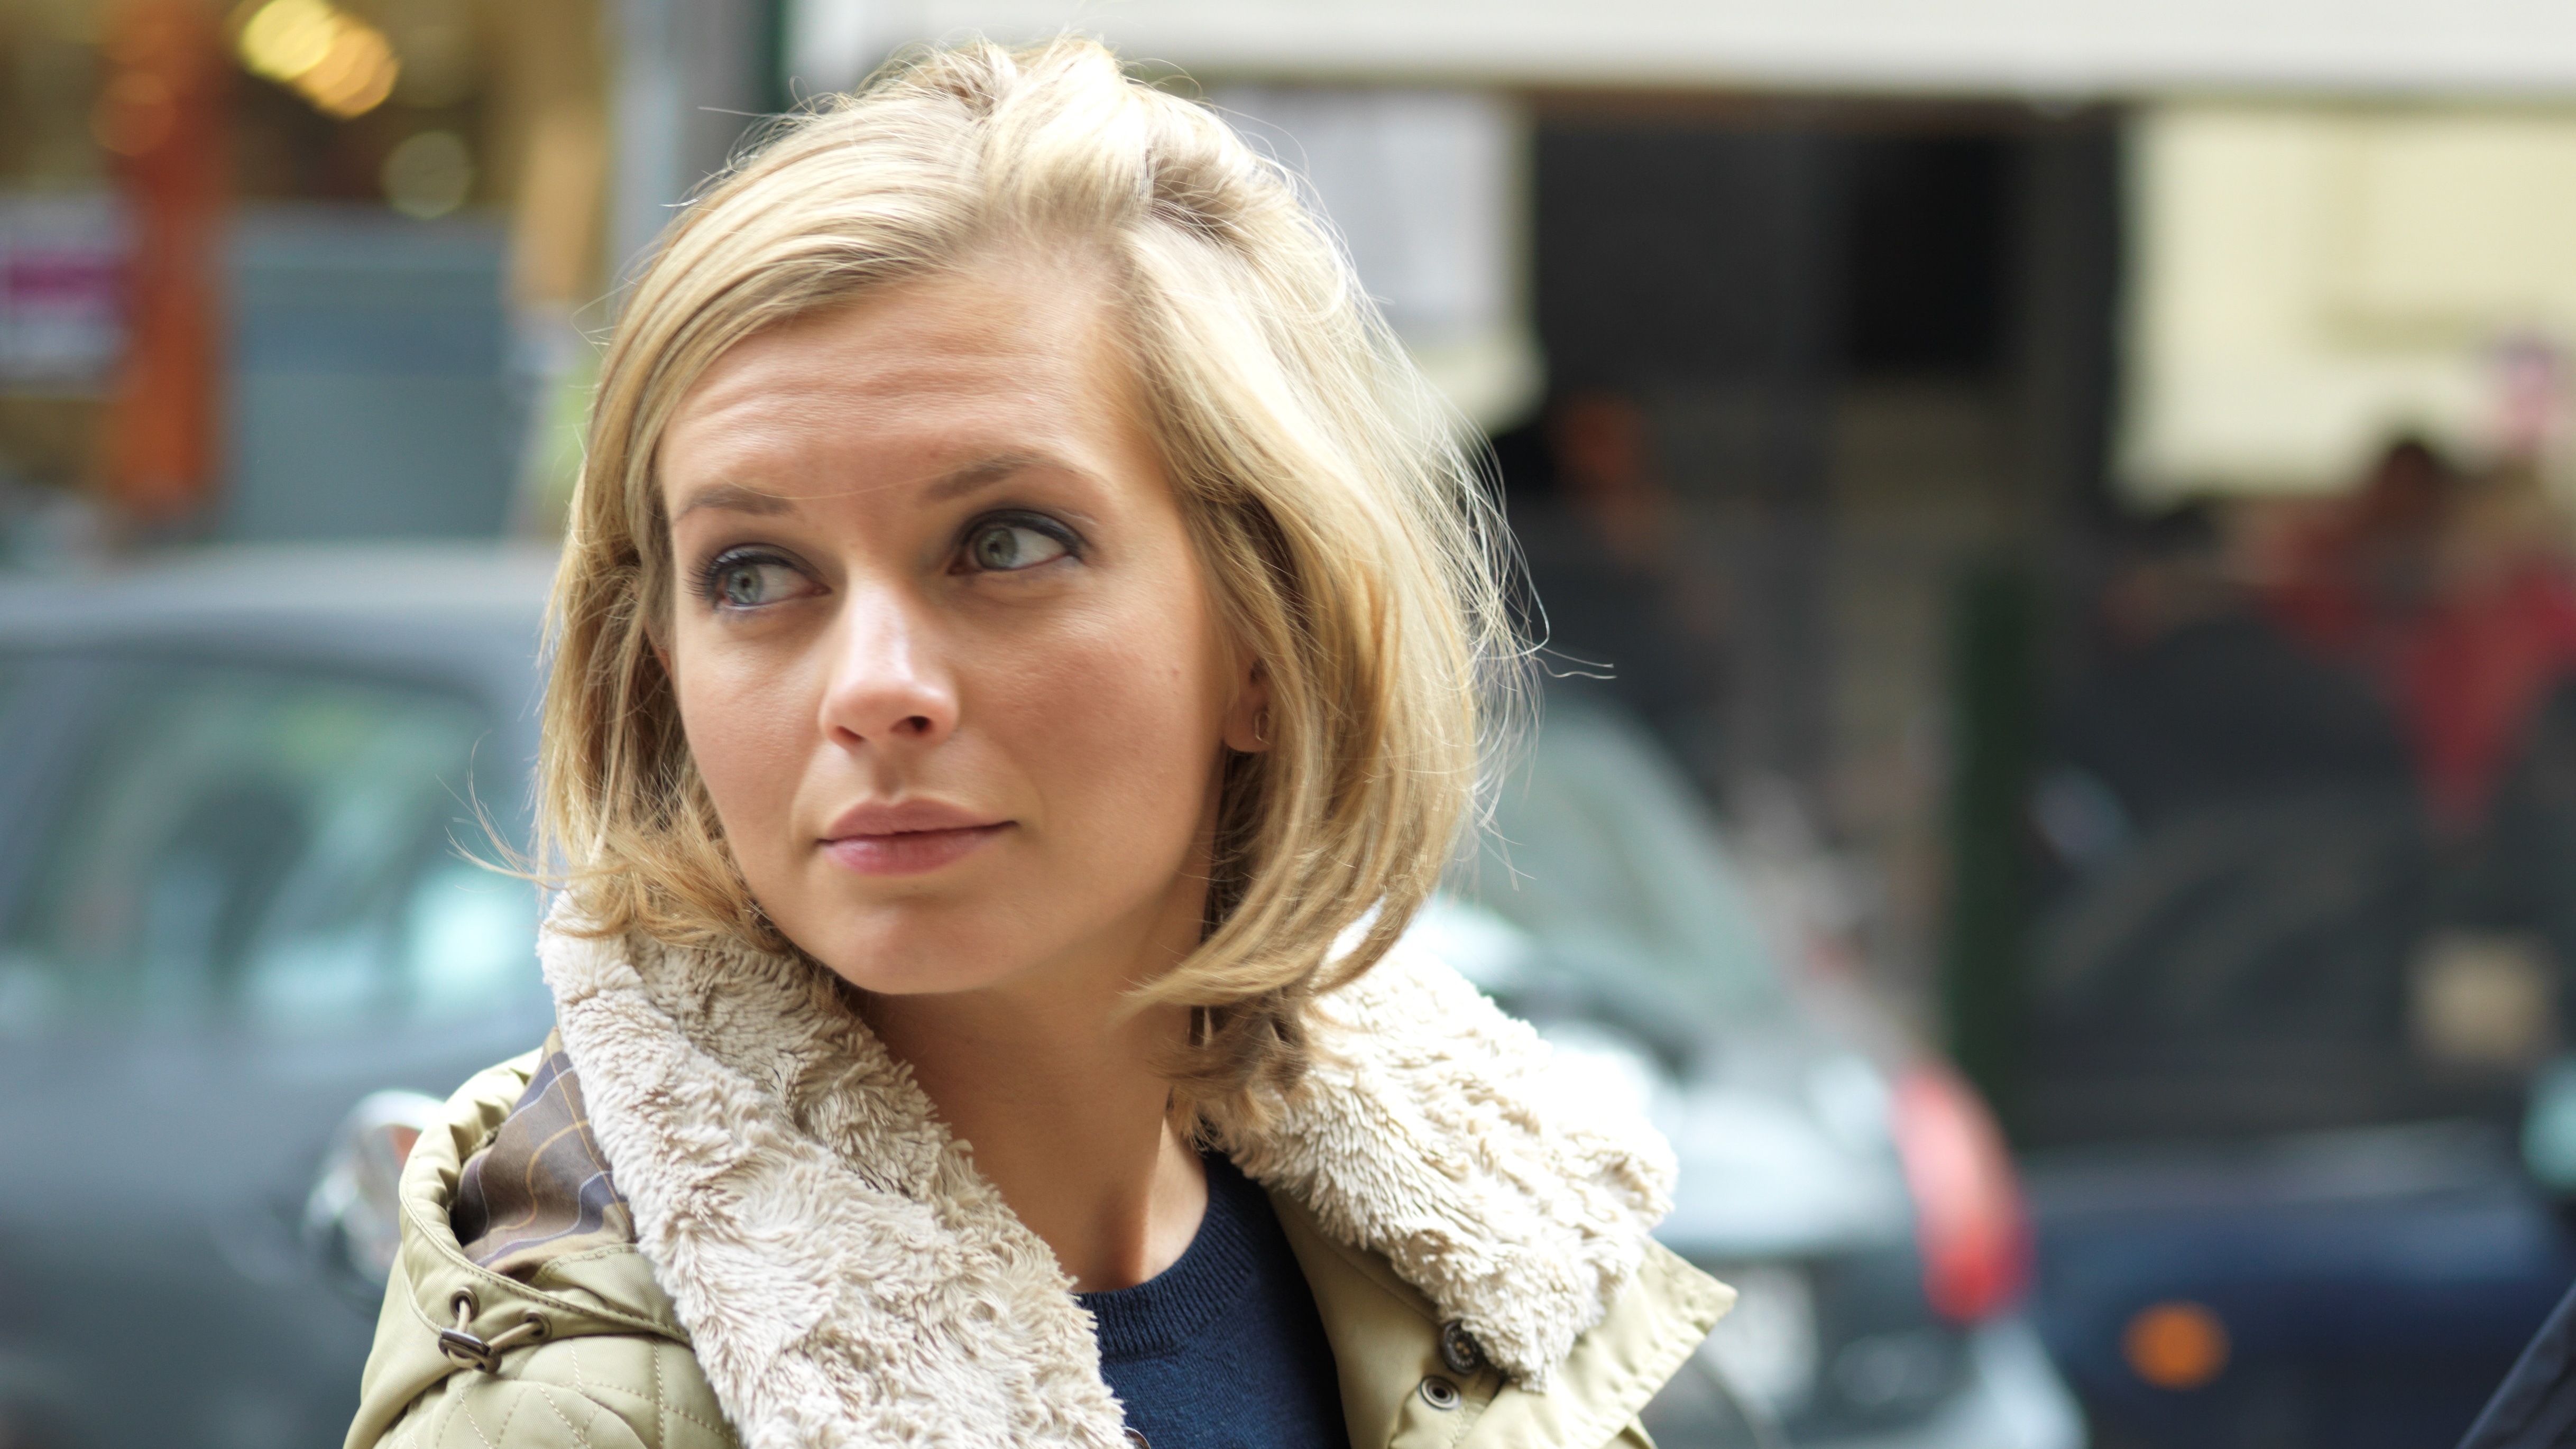 24 Hours to Go Broke - Episode 4 "Thessaloniki" - Picture shows Rachel Riley